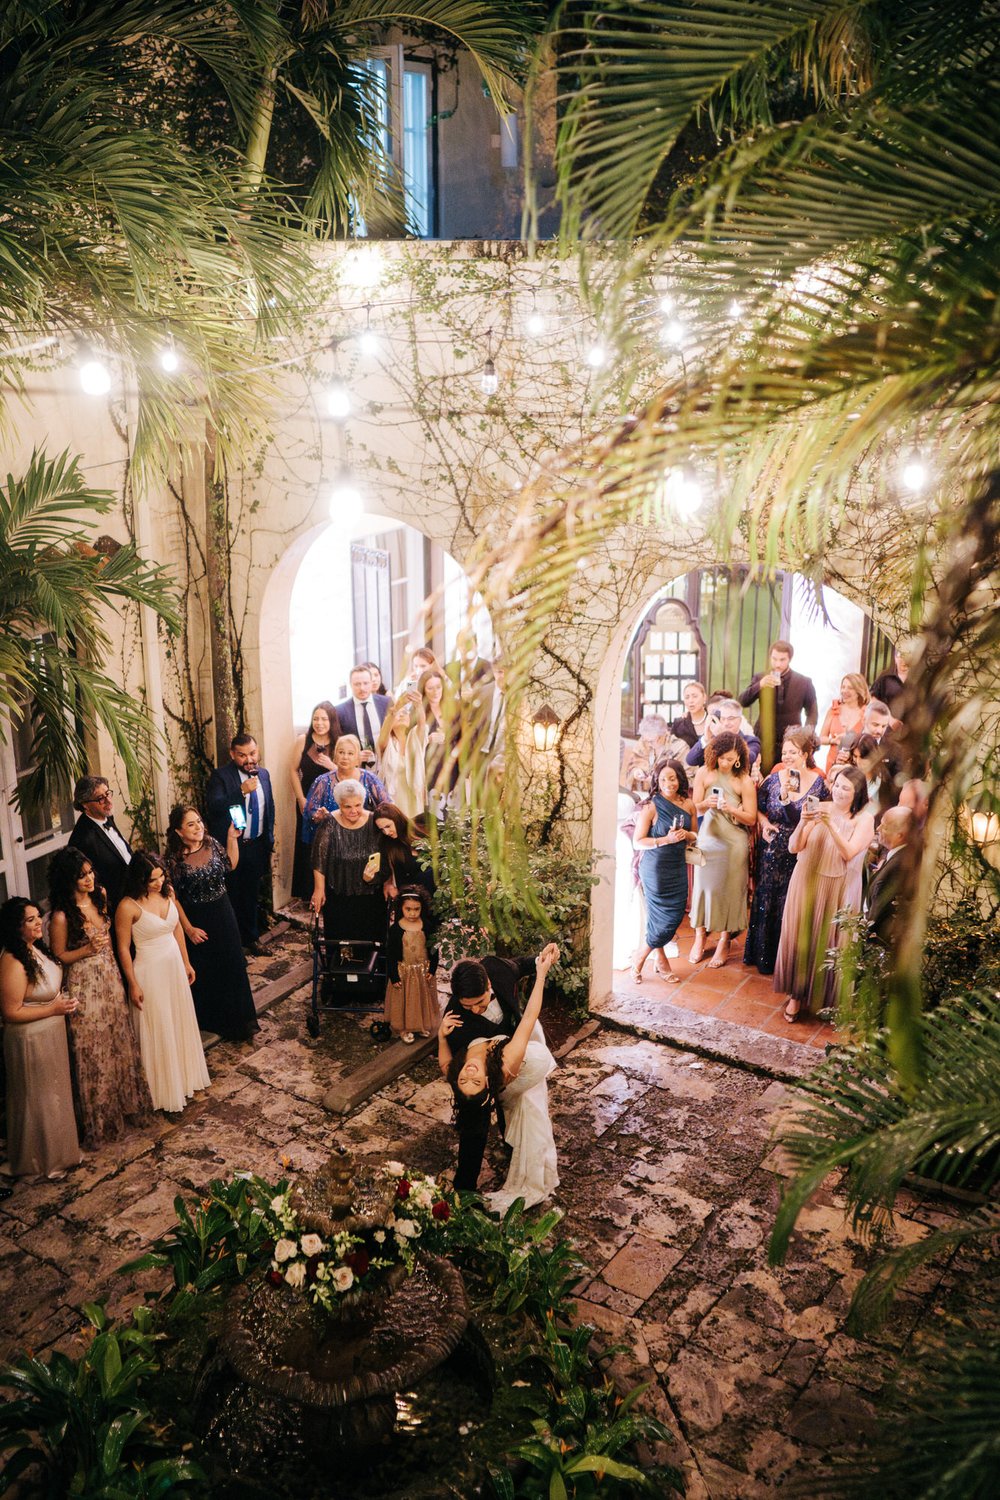 Groom dips bride during first dance in wide photograph taken from second floor